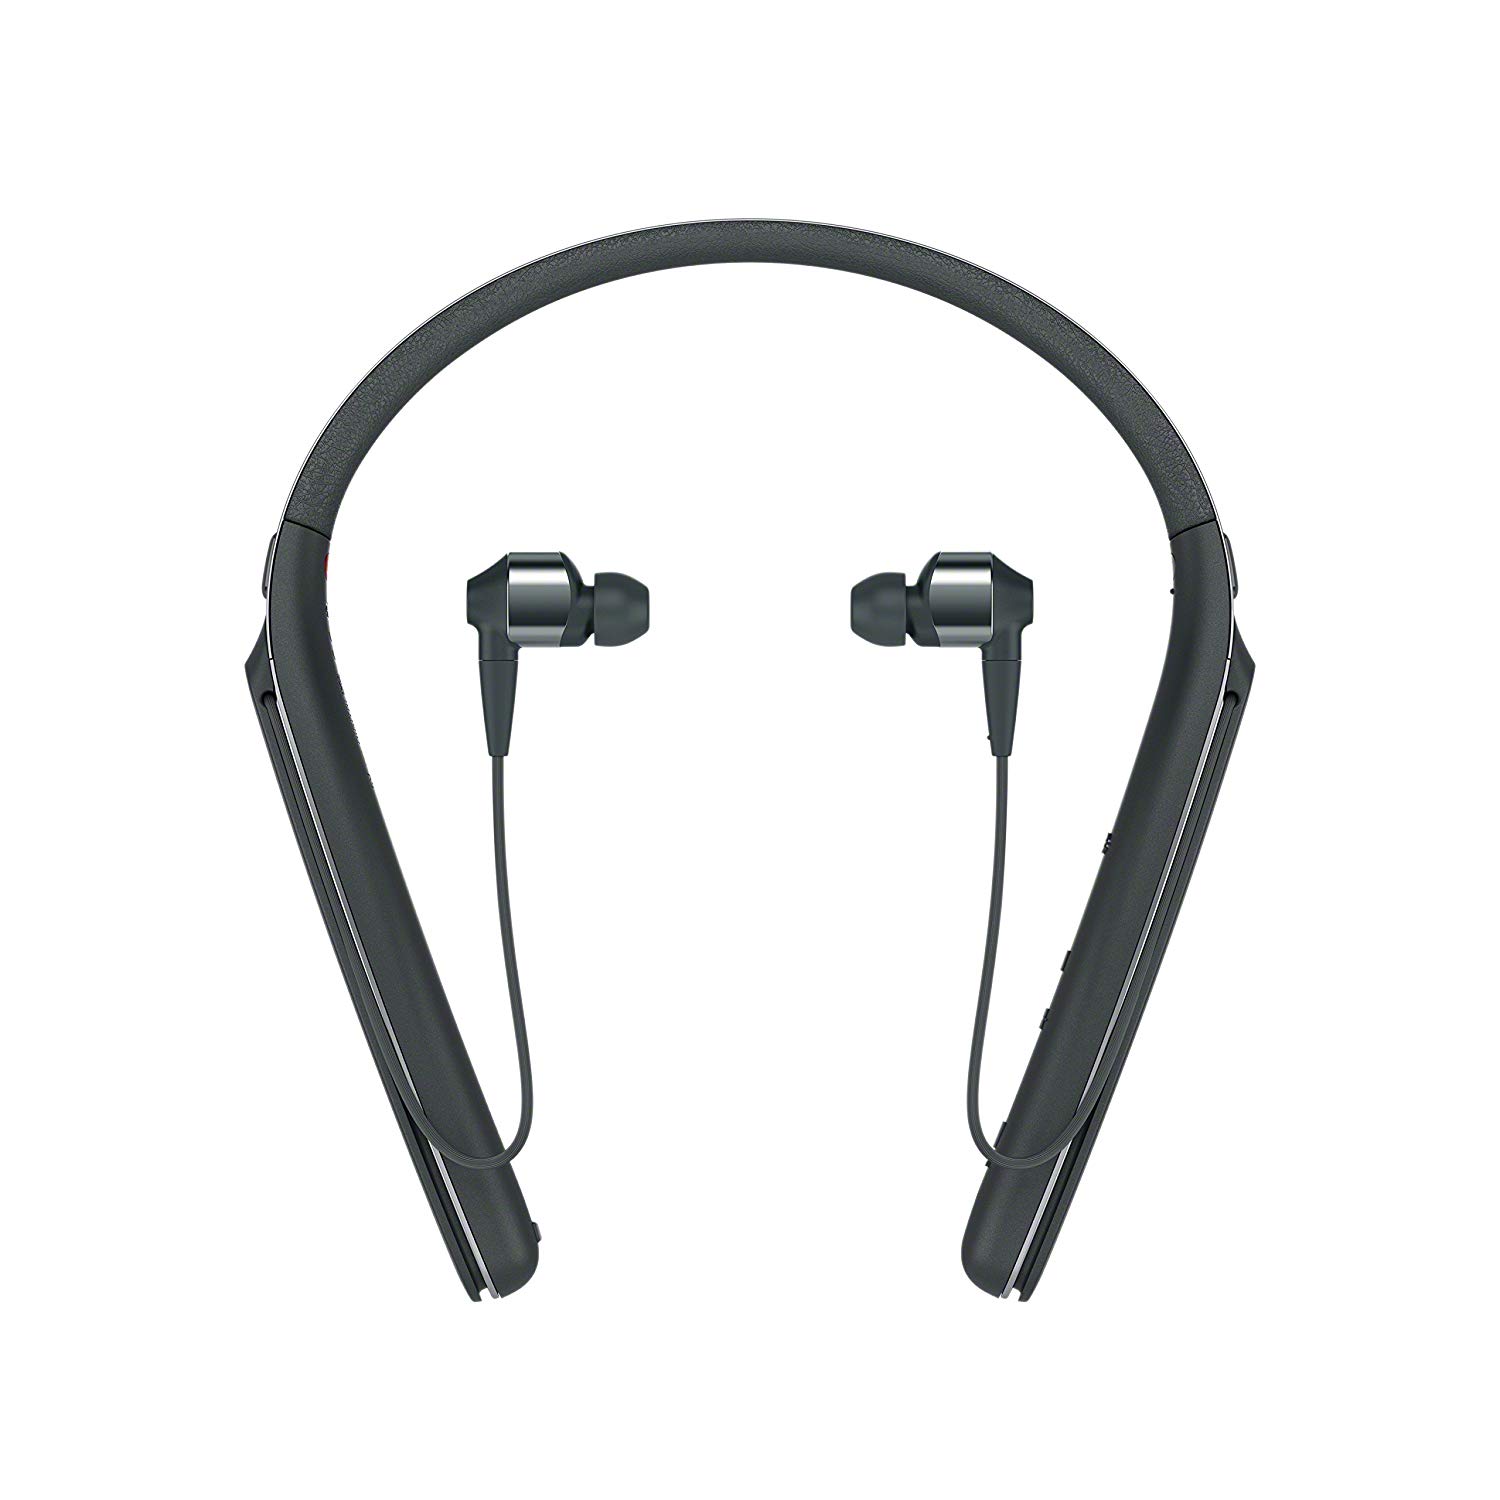 Sony Premium Noise Cancelling Wireless Behind-Neck in Ear Headphones - Black (WI1000X/B)